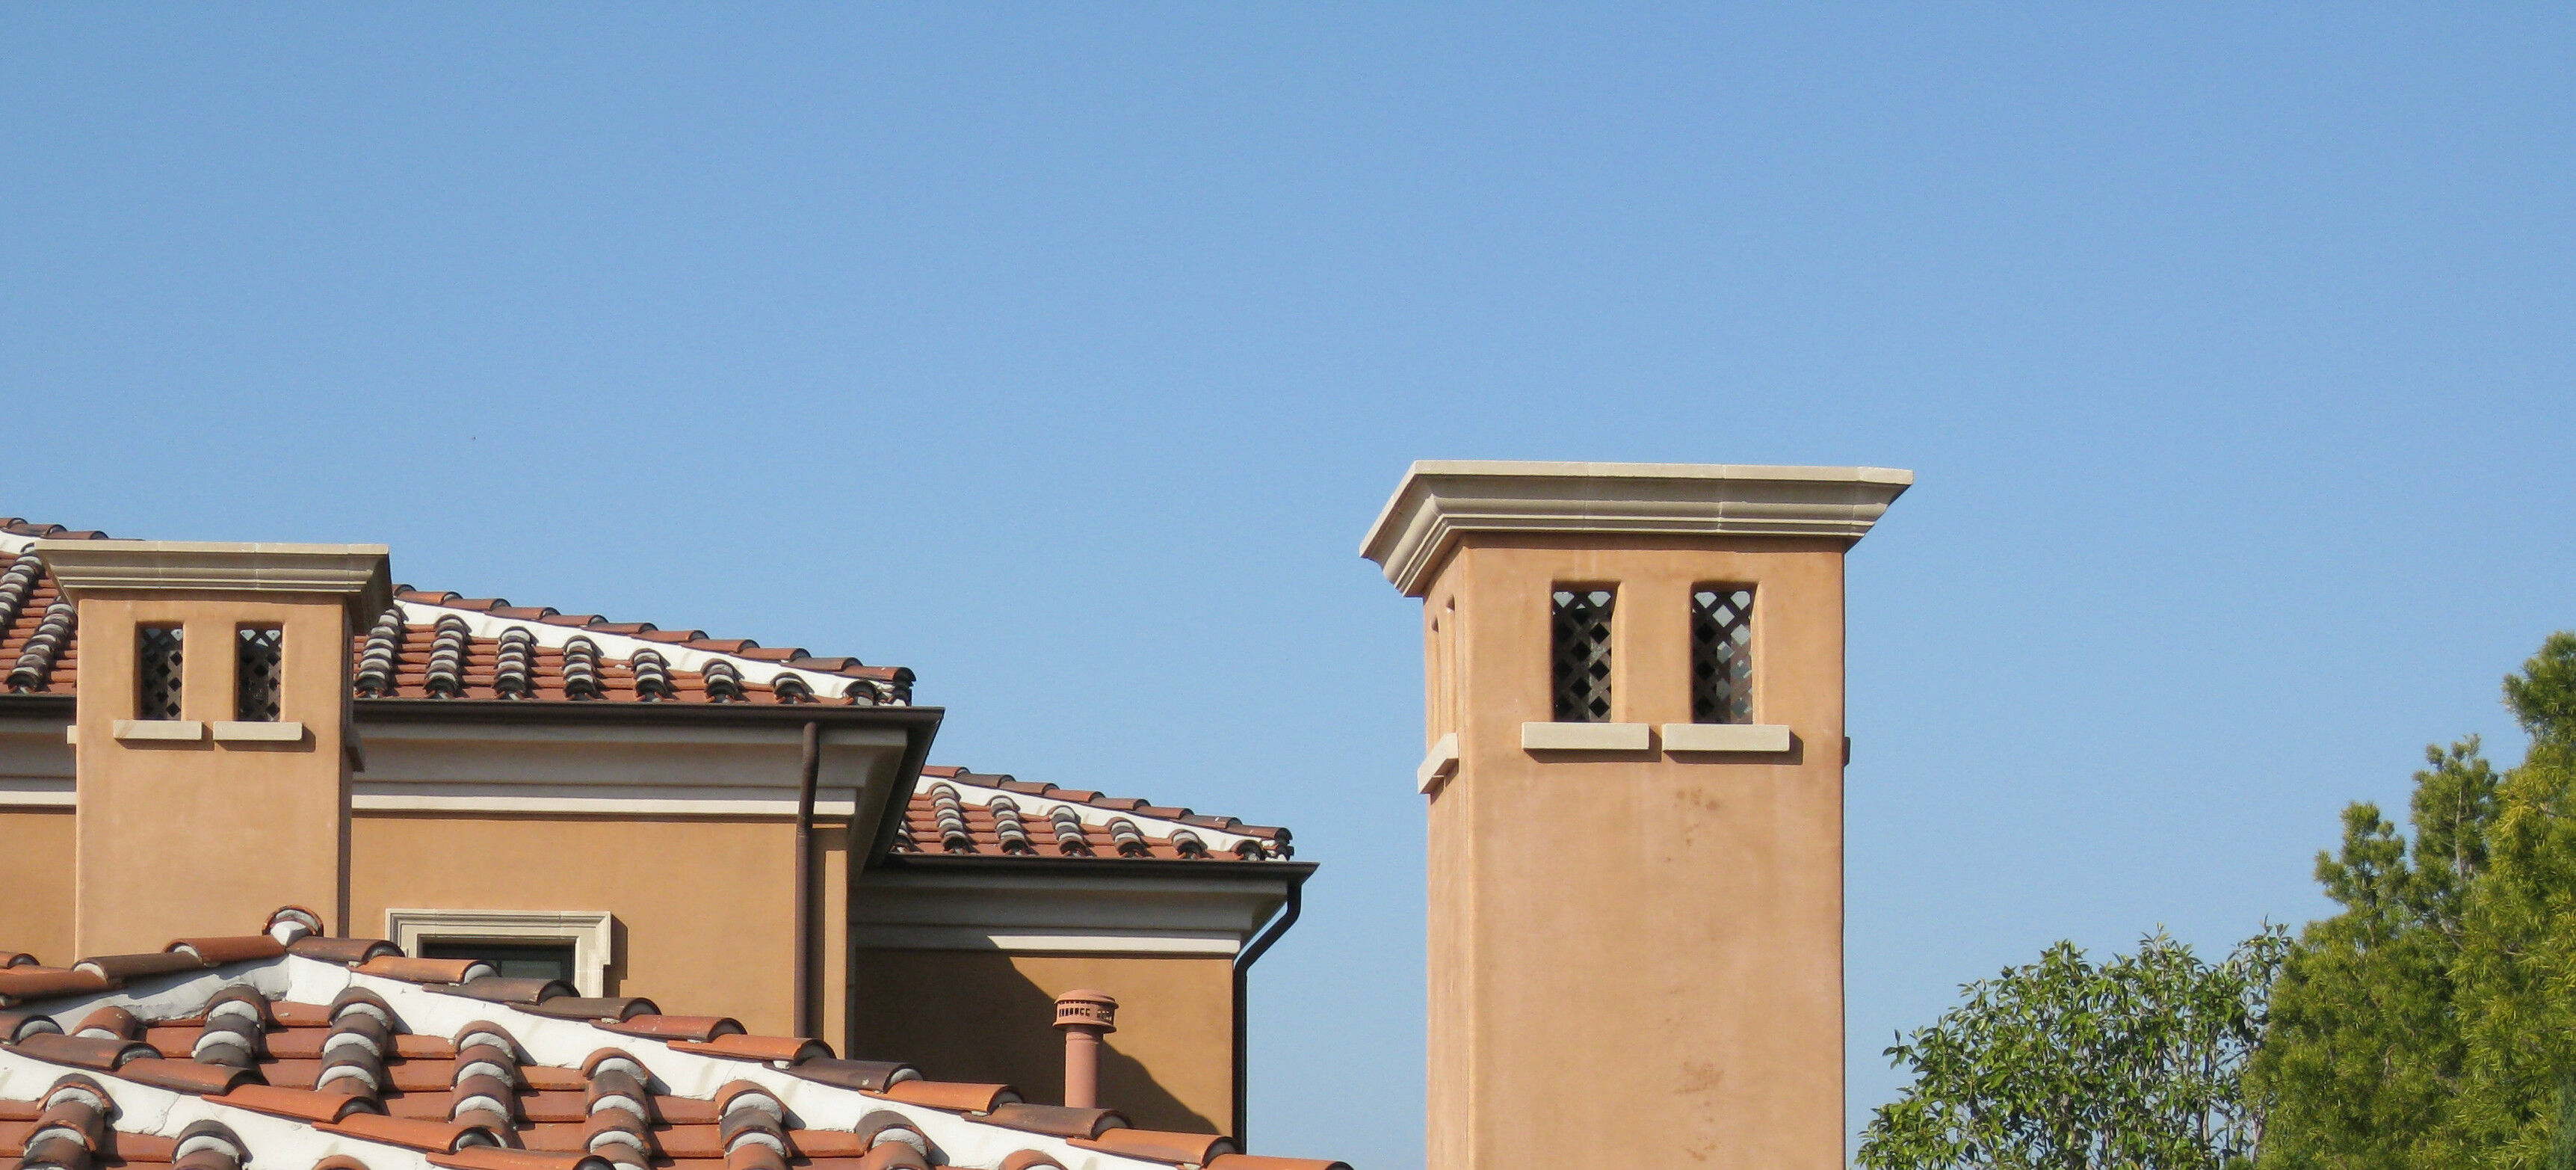 A rooftop with decorative brown roof tiles and two chimney stacks topped with chimney caps.